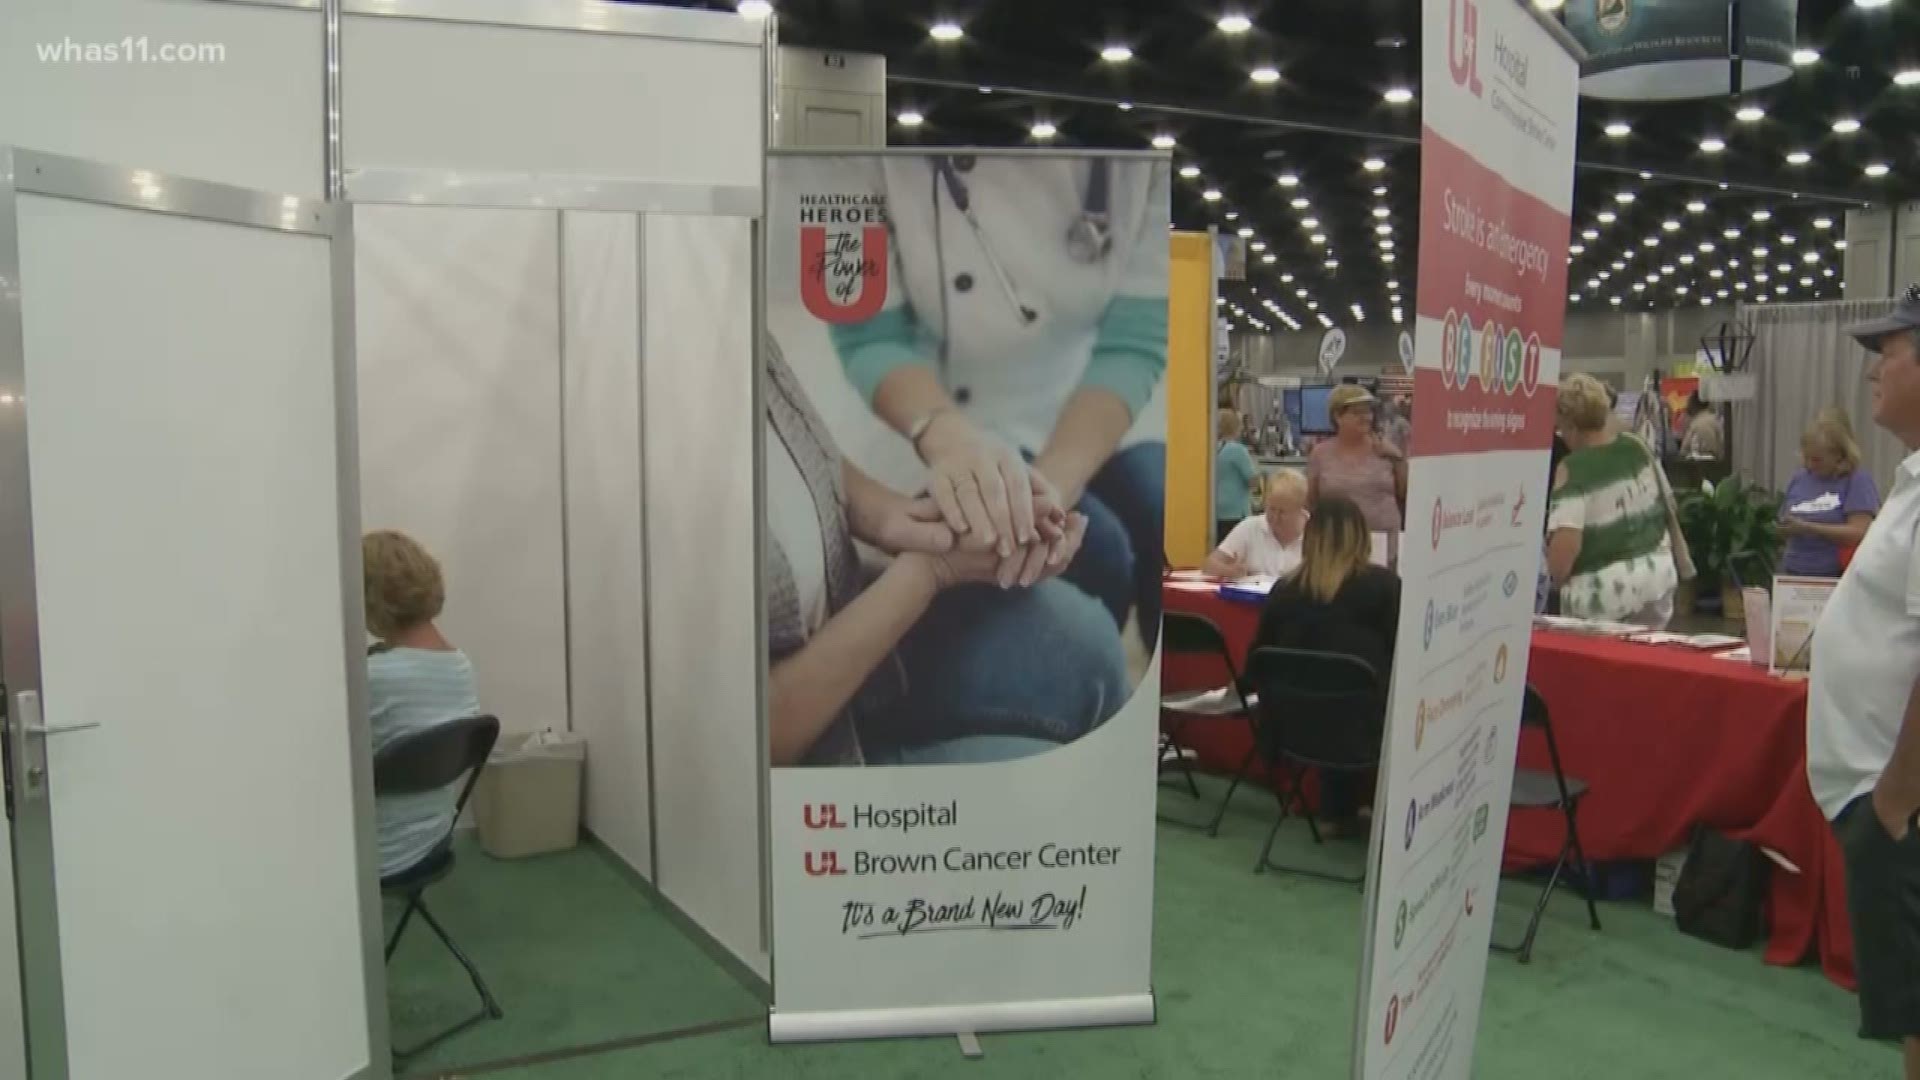 For the past 30 years, doctors have offered free cancer screenings at the Kentucky State Fair, and this year is no exception. WHAS11's Derrick Rose was joined by Doctor Tim Brown, a professor with UofL's division of dermatology to discuss skin cancer.